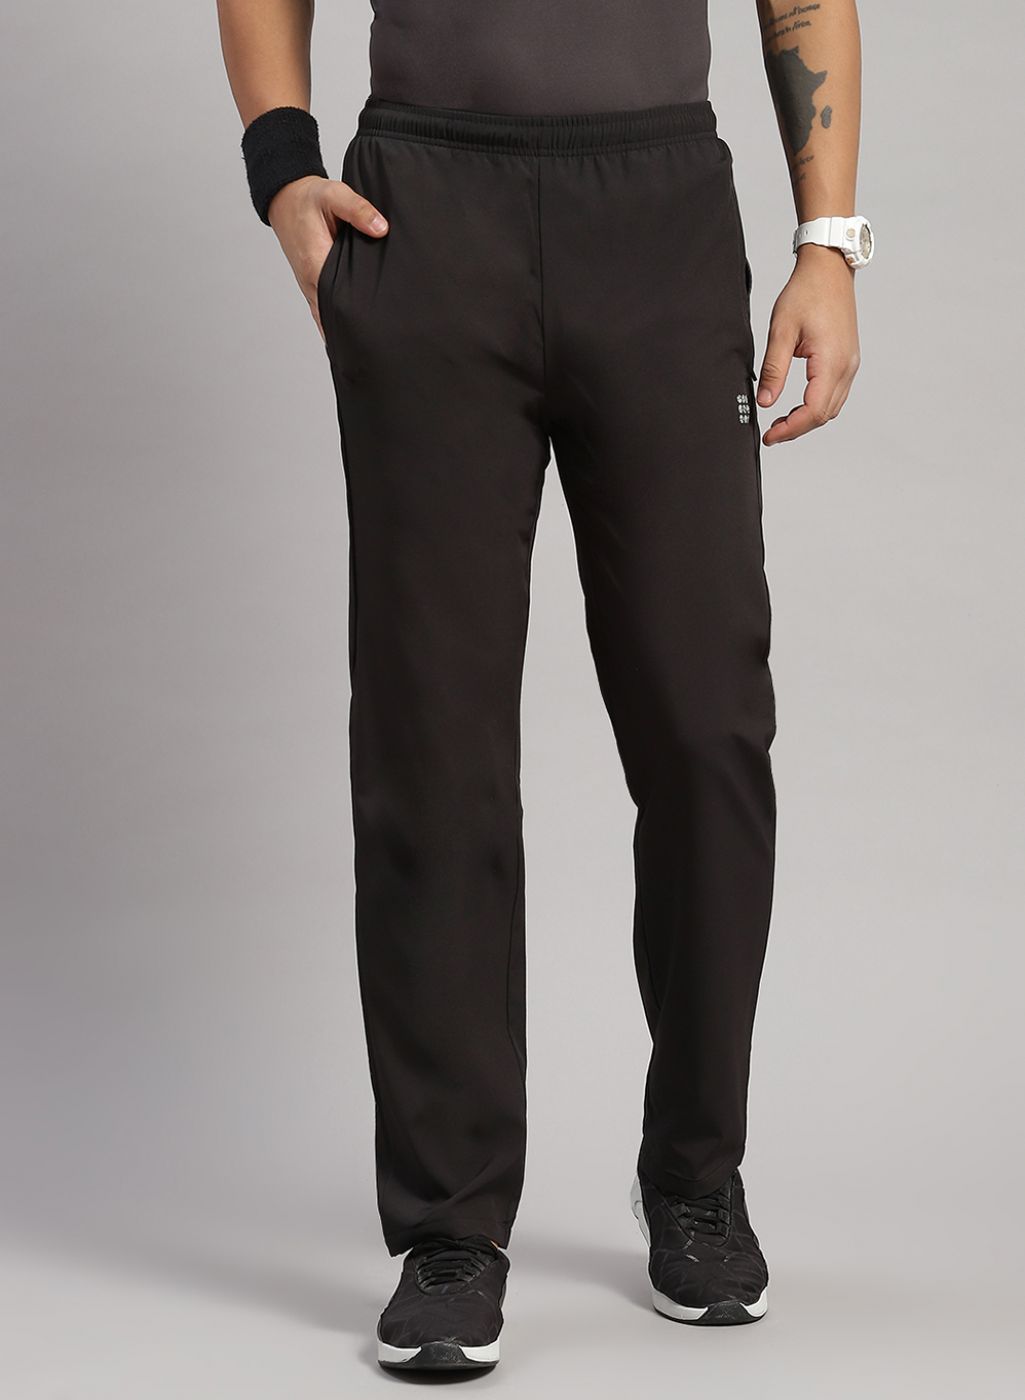 Russell athletic track pants - Gem